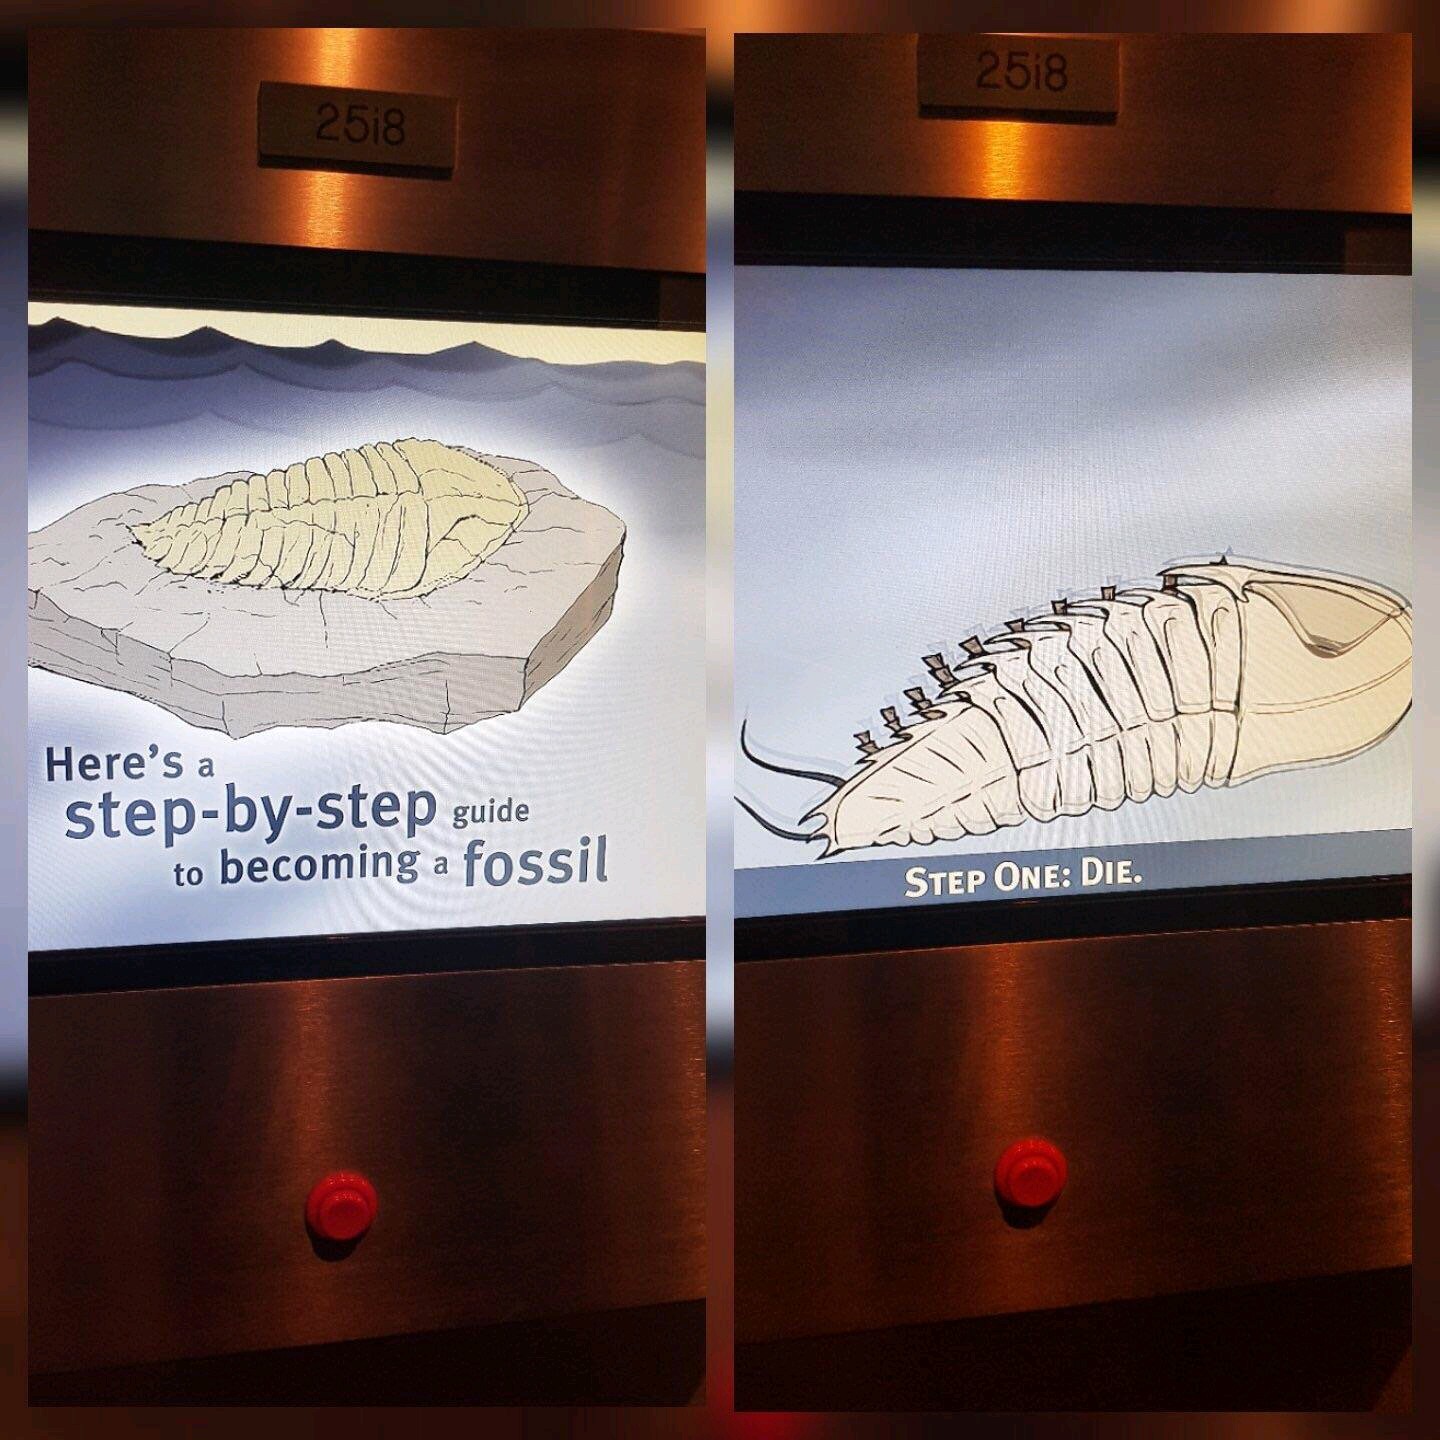 How to become a fossil